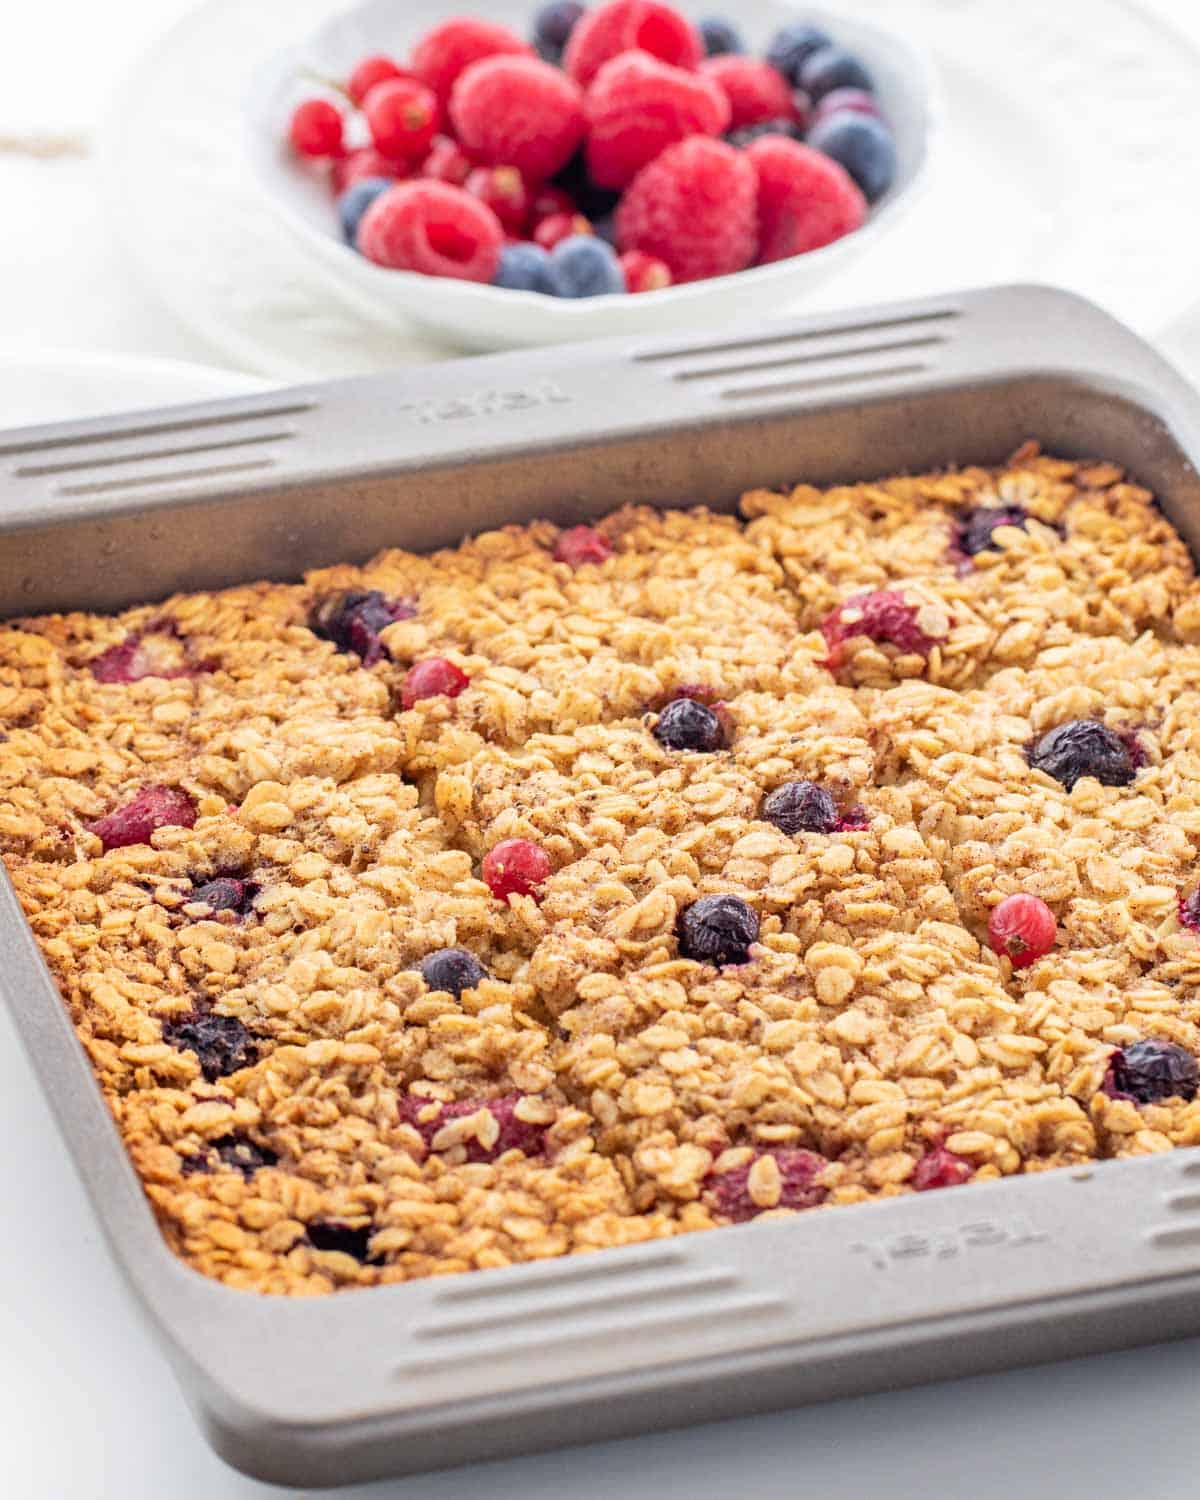 Baked Oatmeal - Craving Home Cooked